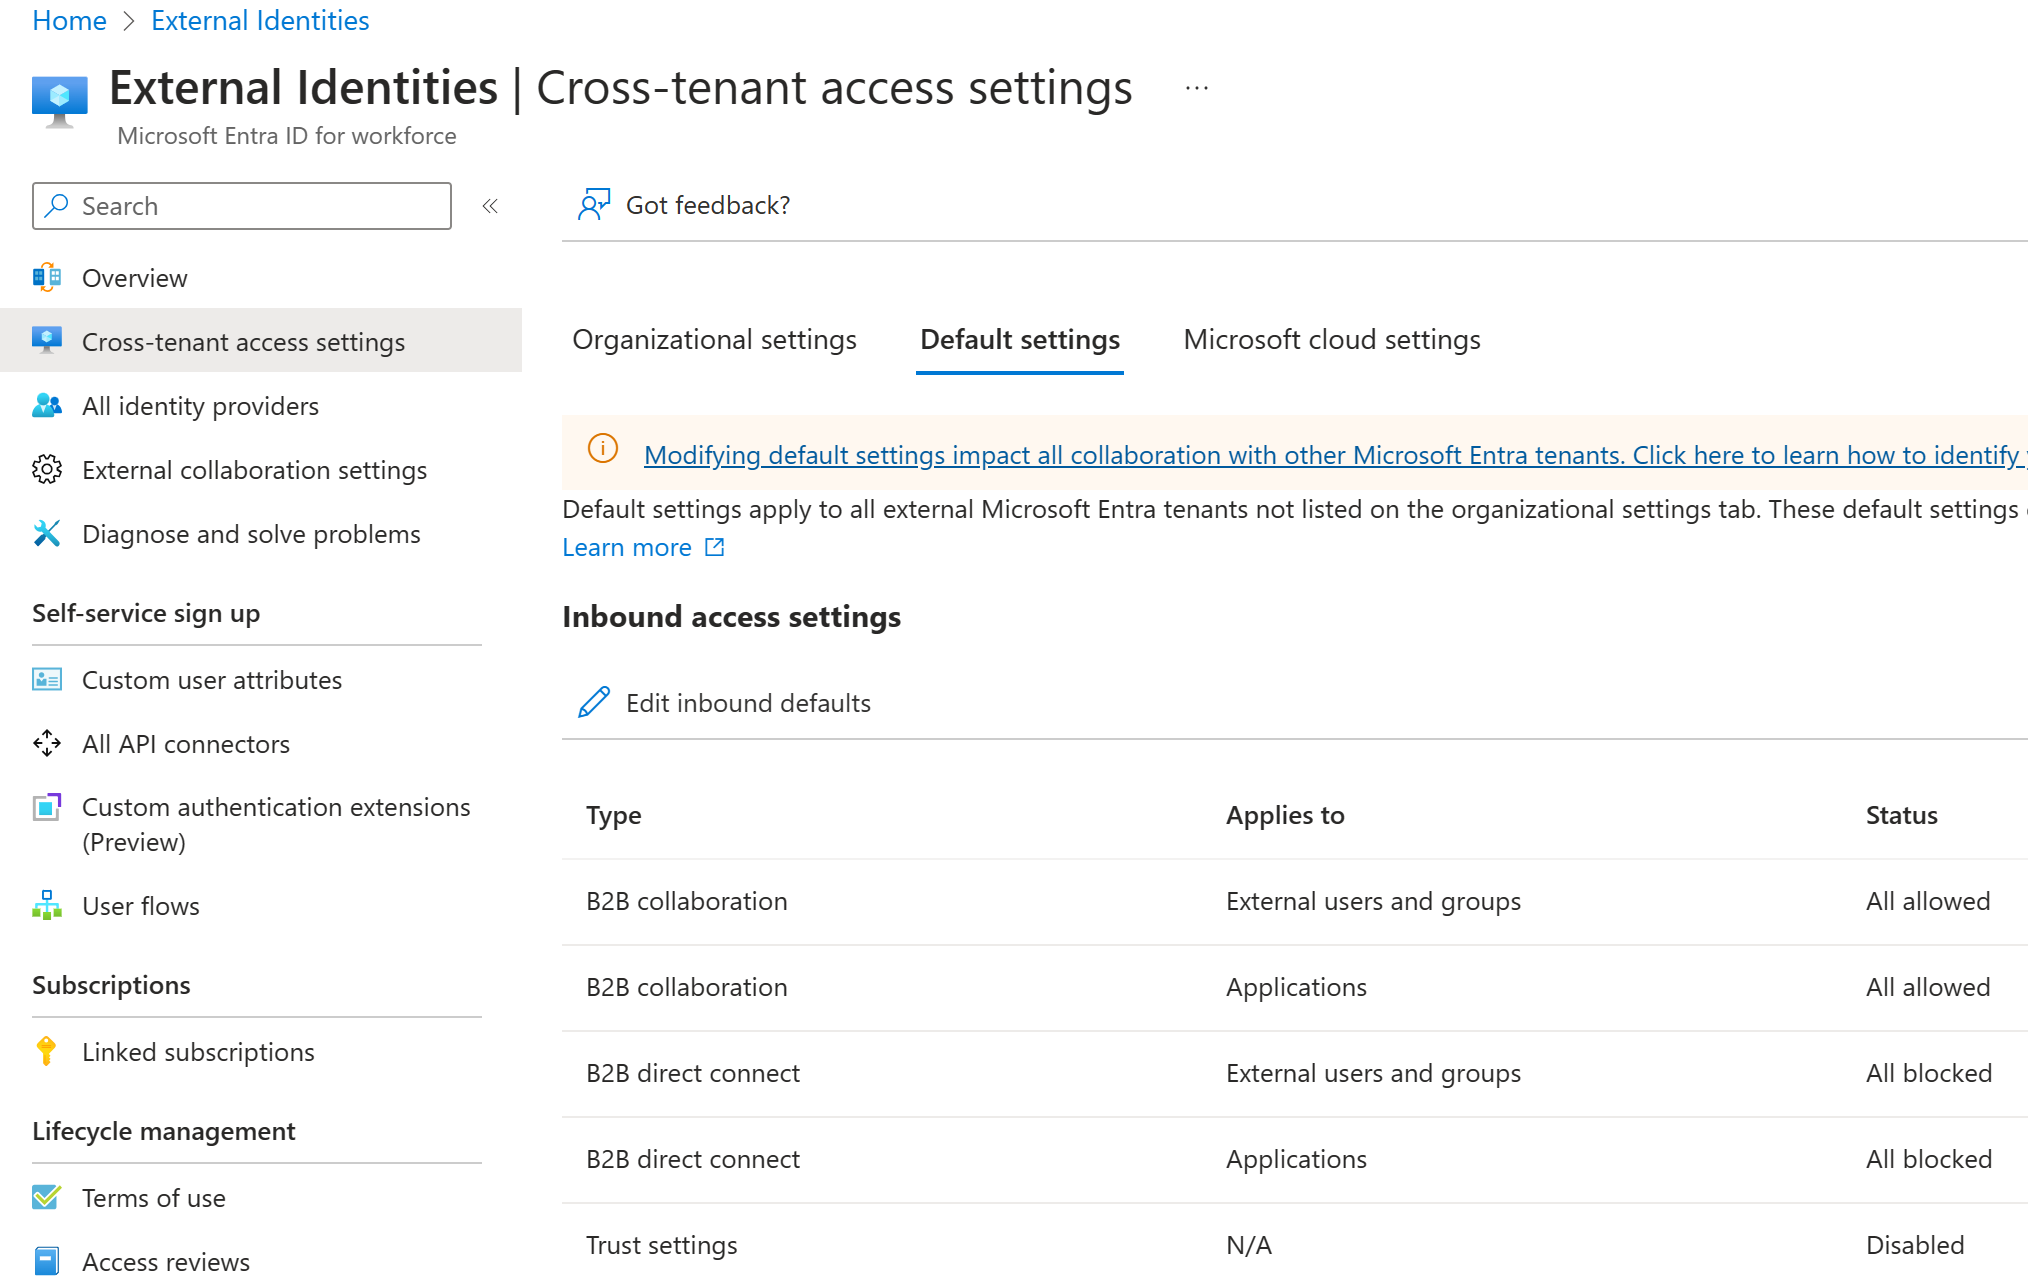 Screenshot of the Microsoft Entra ID external identities cross-tenant access controls dialog. Configure inbound and outbound access.